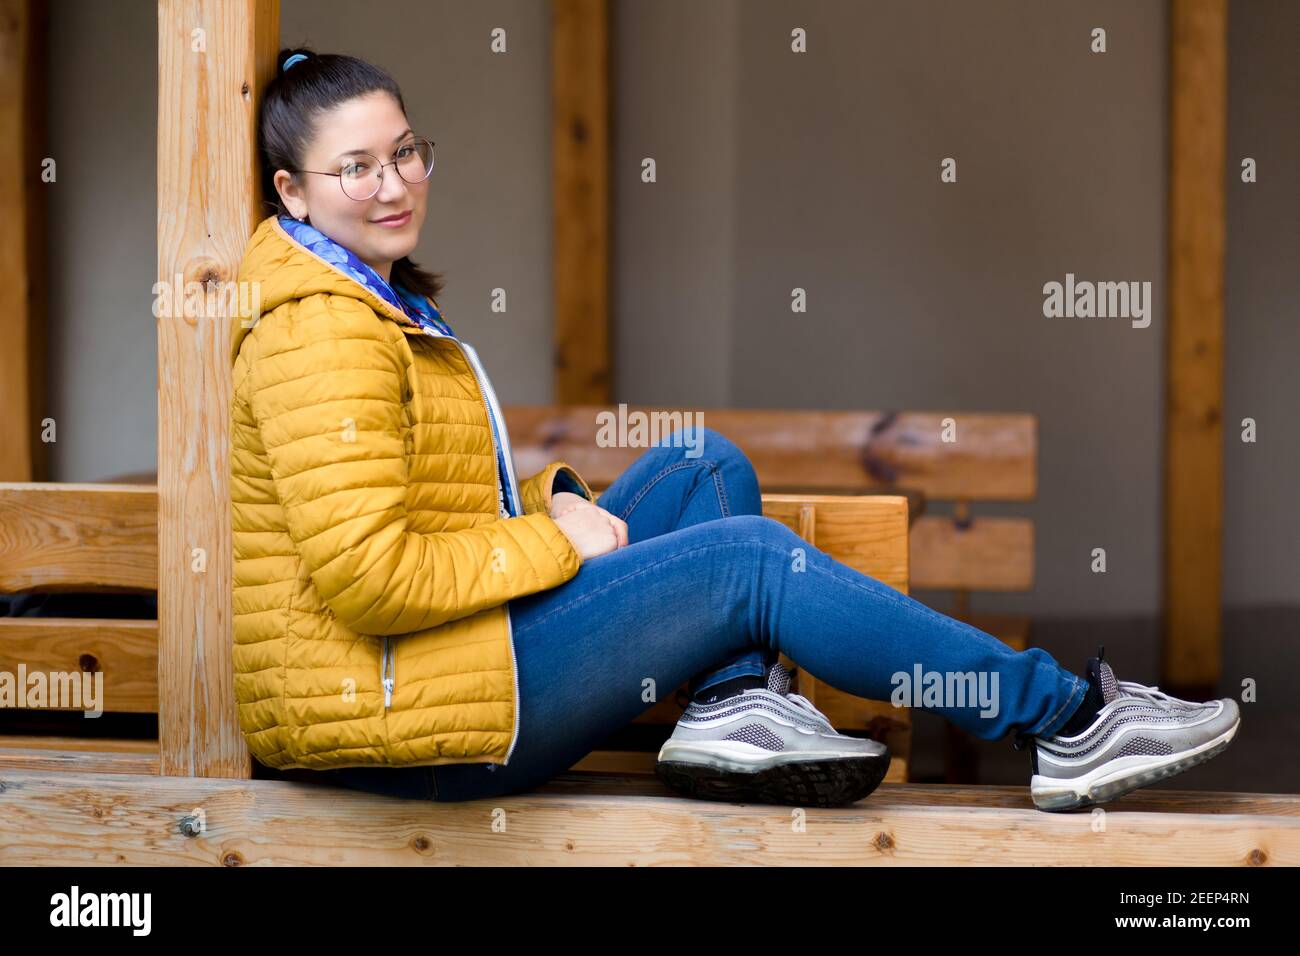 Portrait of a young chubby girl in winter clothing Stock Photo